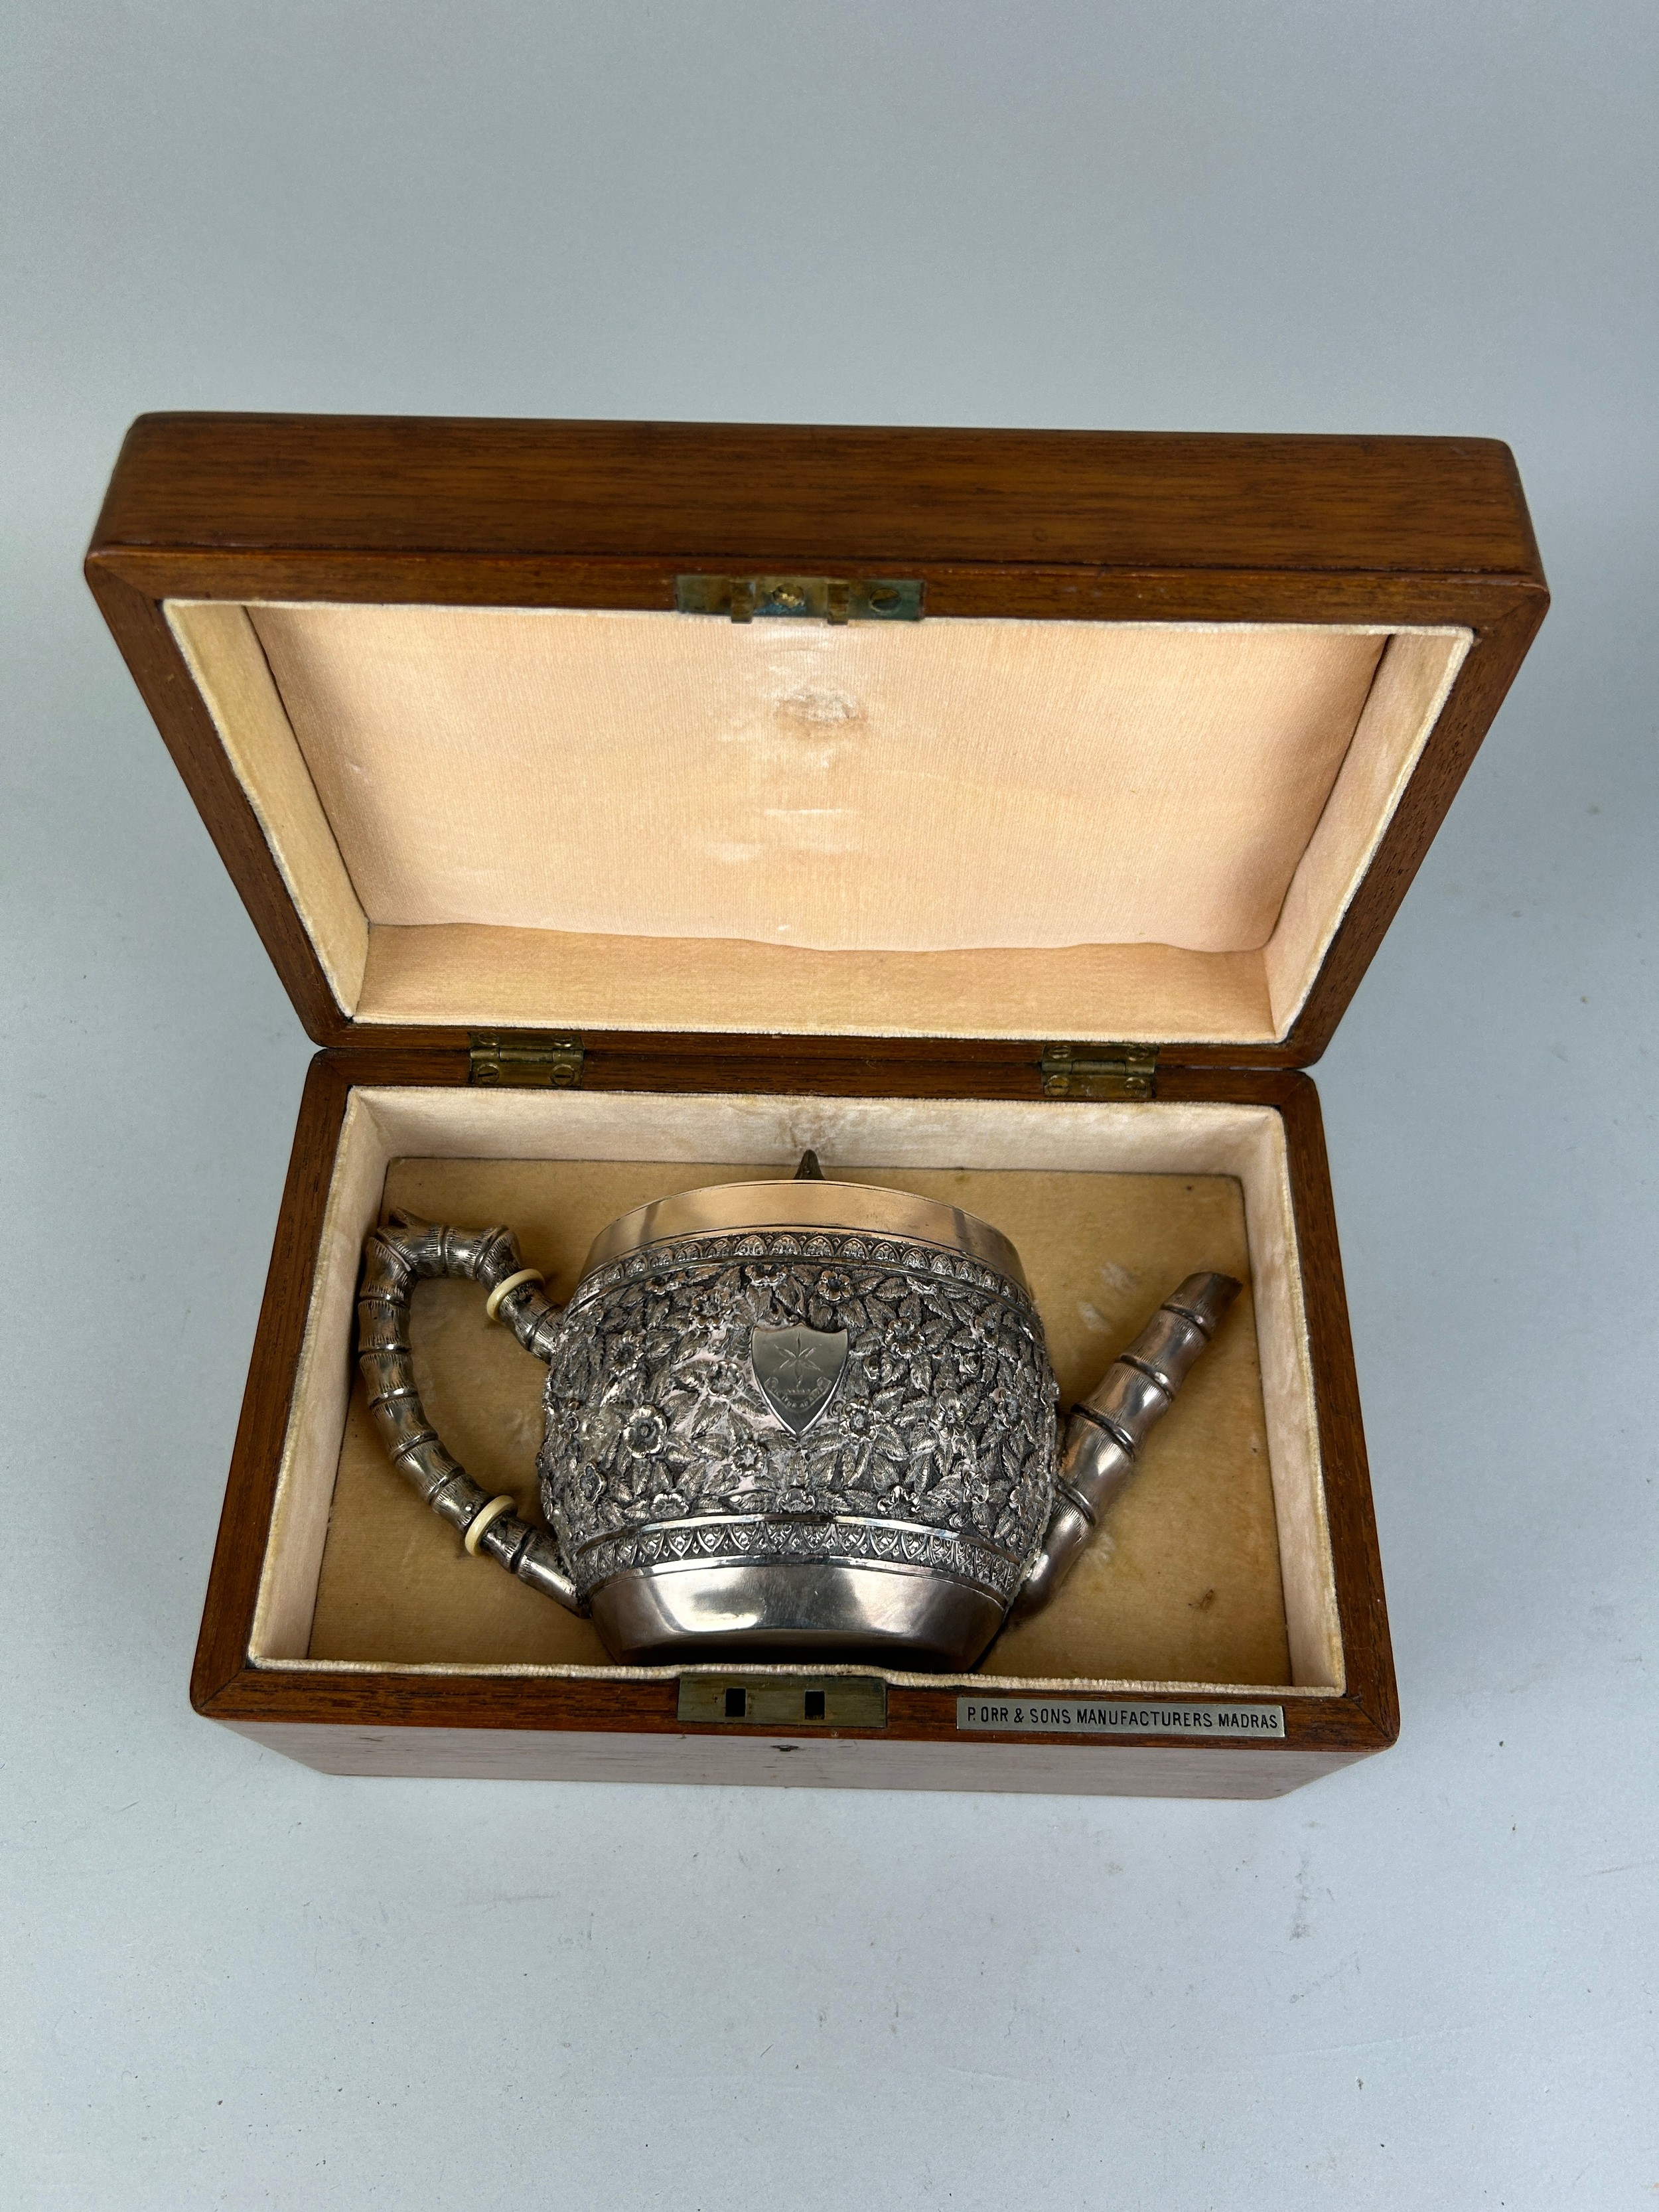 P ORR AND SONS: A SILVER TEA POT IN ORIGINAL WOODEN CASE, Weight: 425gms - Image 2 of 3